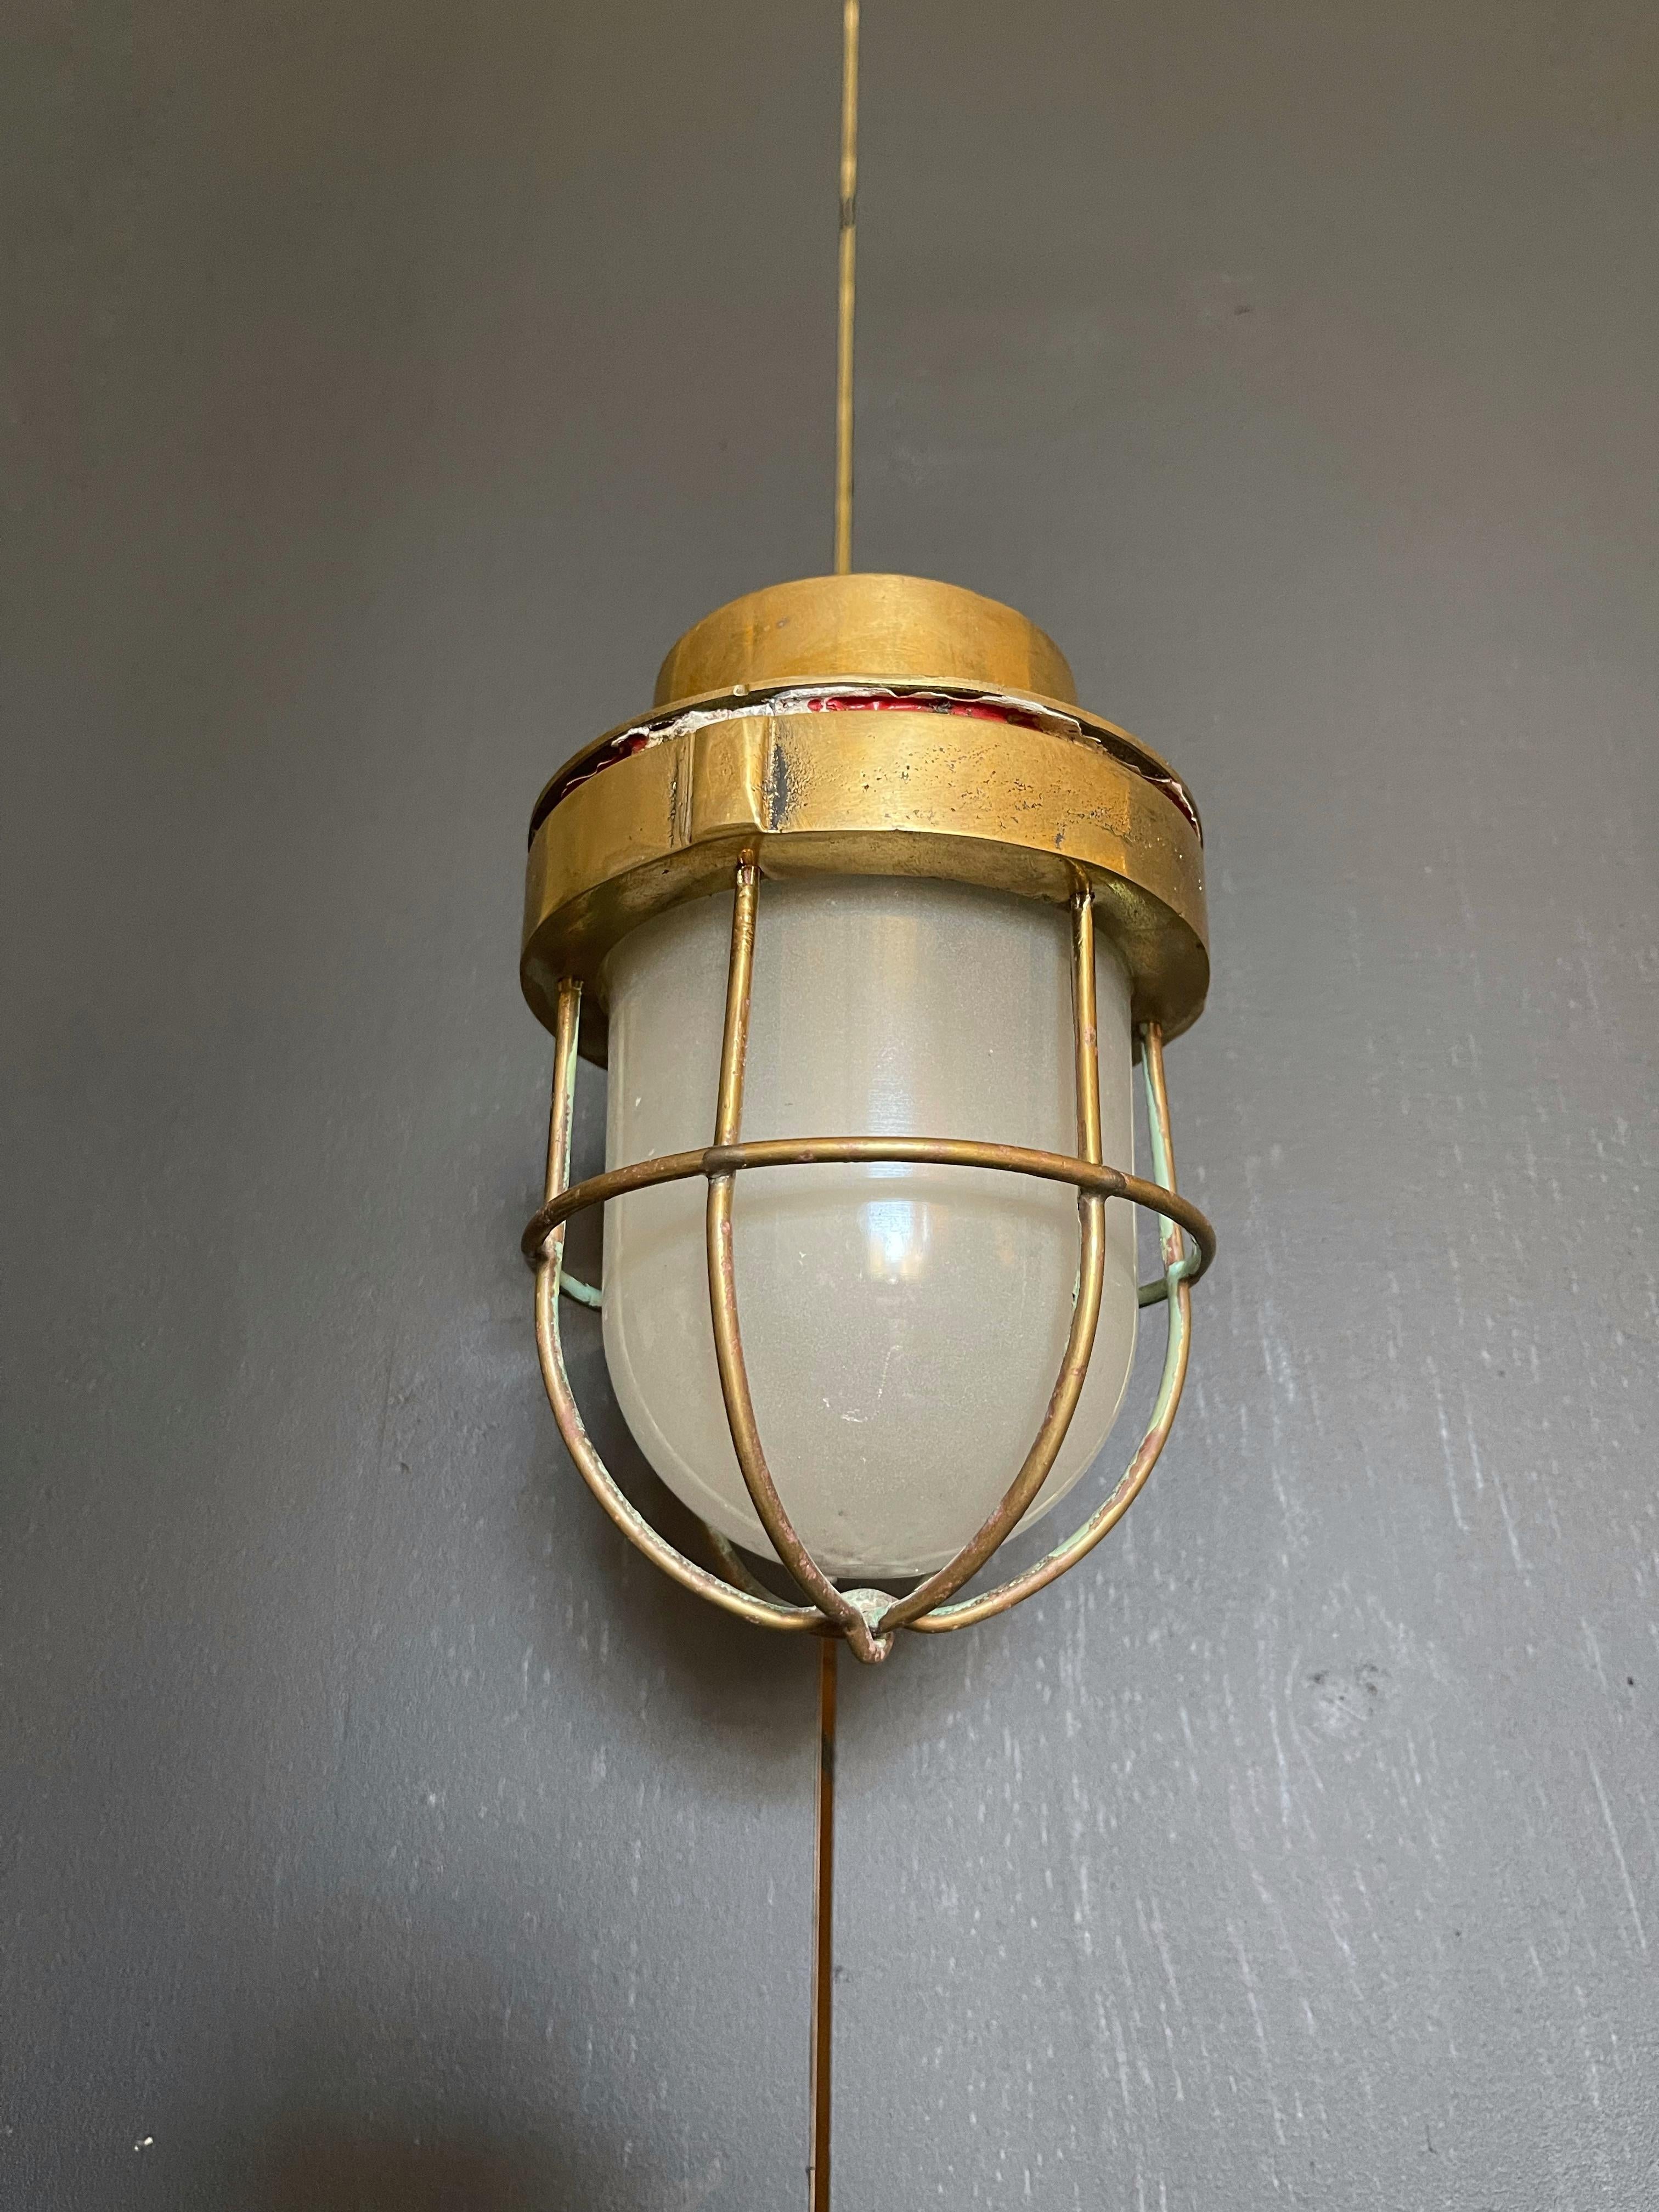 Enhance your space with timeless maritime charm! Our brass nautical sconce combines classic elegance with functional design. Crafted from high-quality brass, it adds a touch of coastal allure to any room or outdoor area. Illuminate your home with